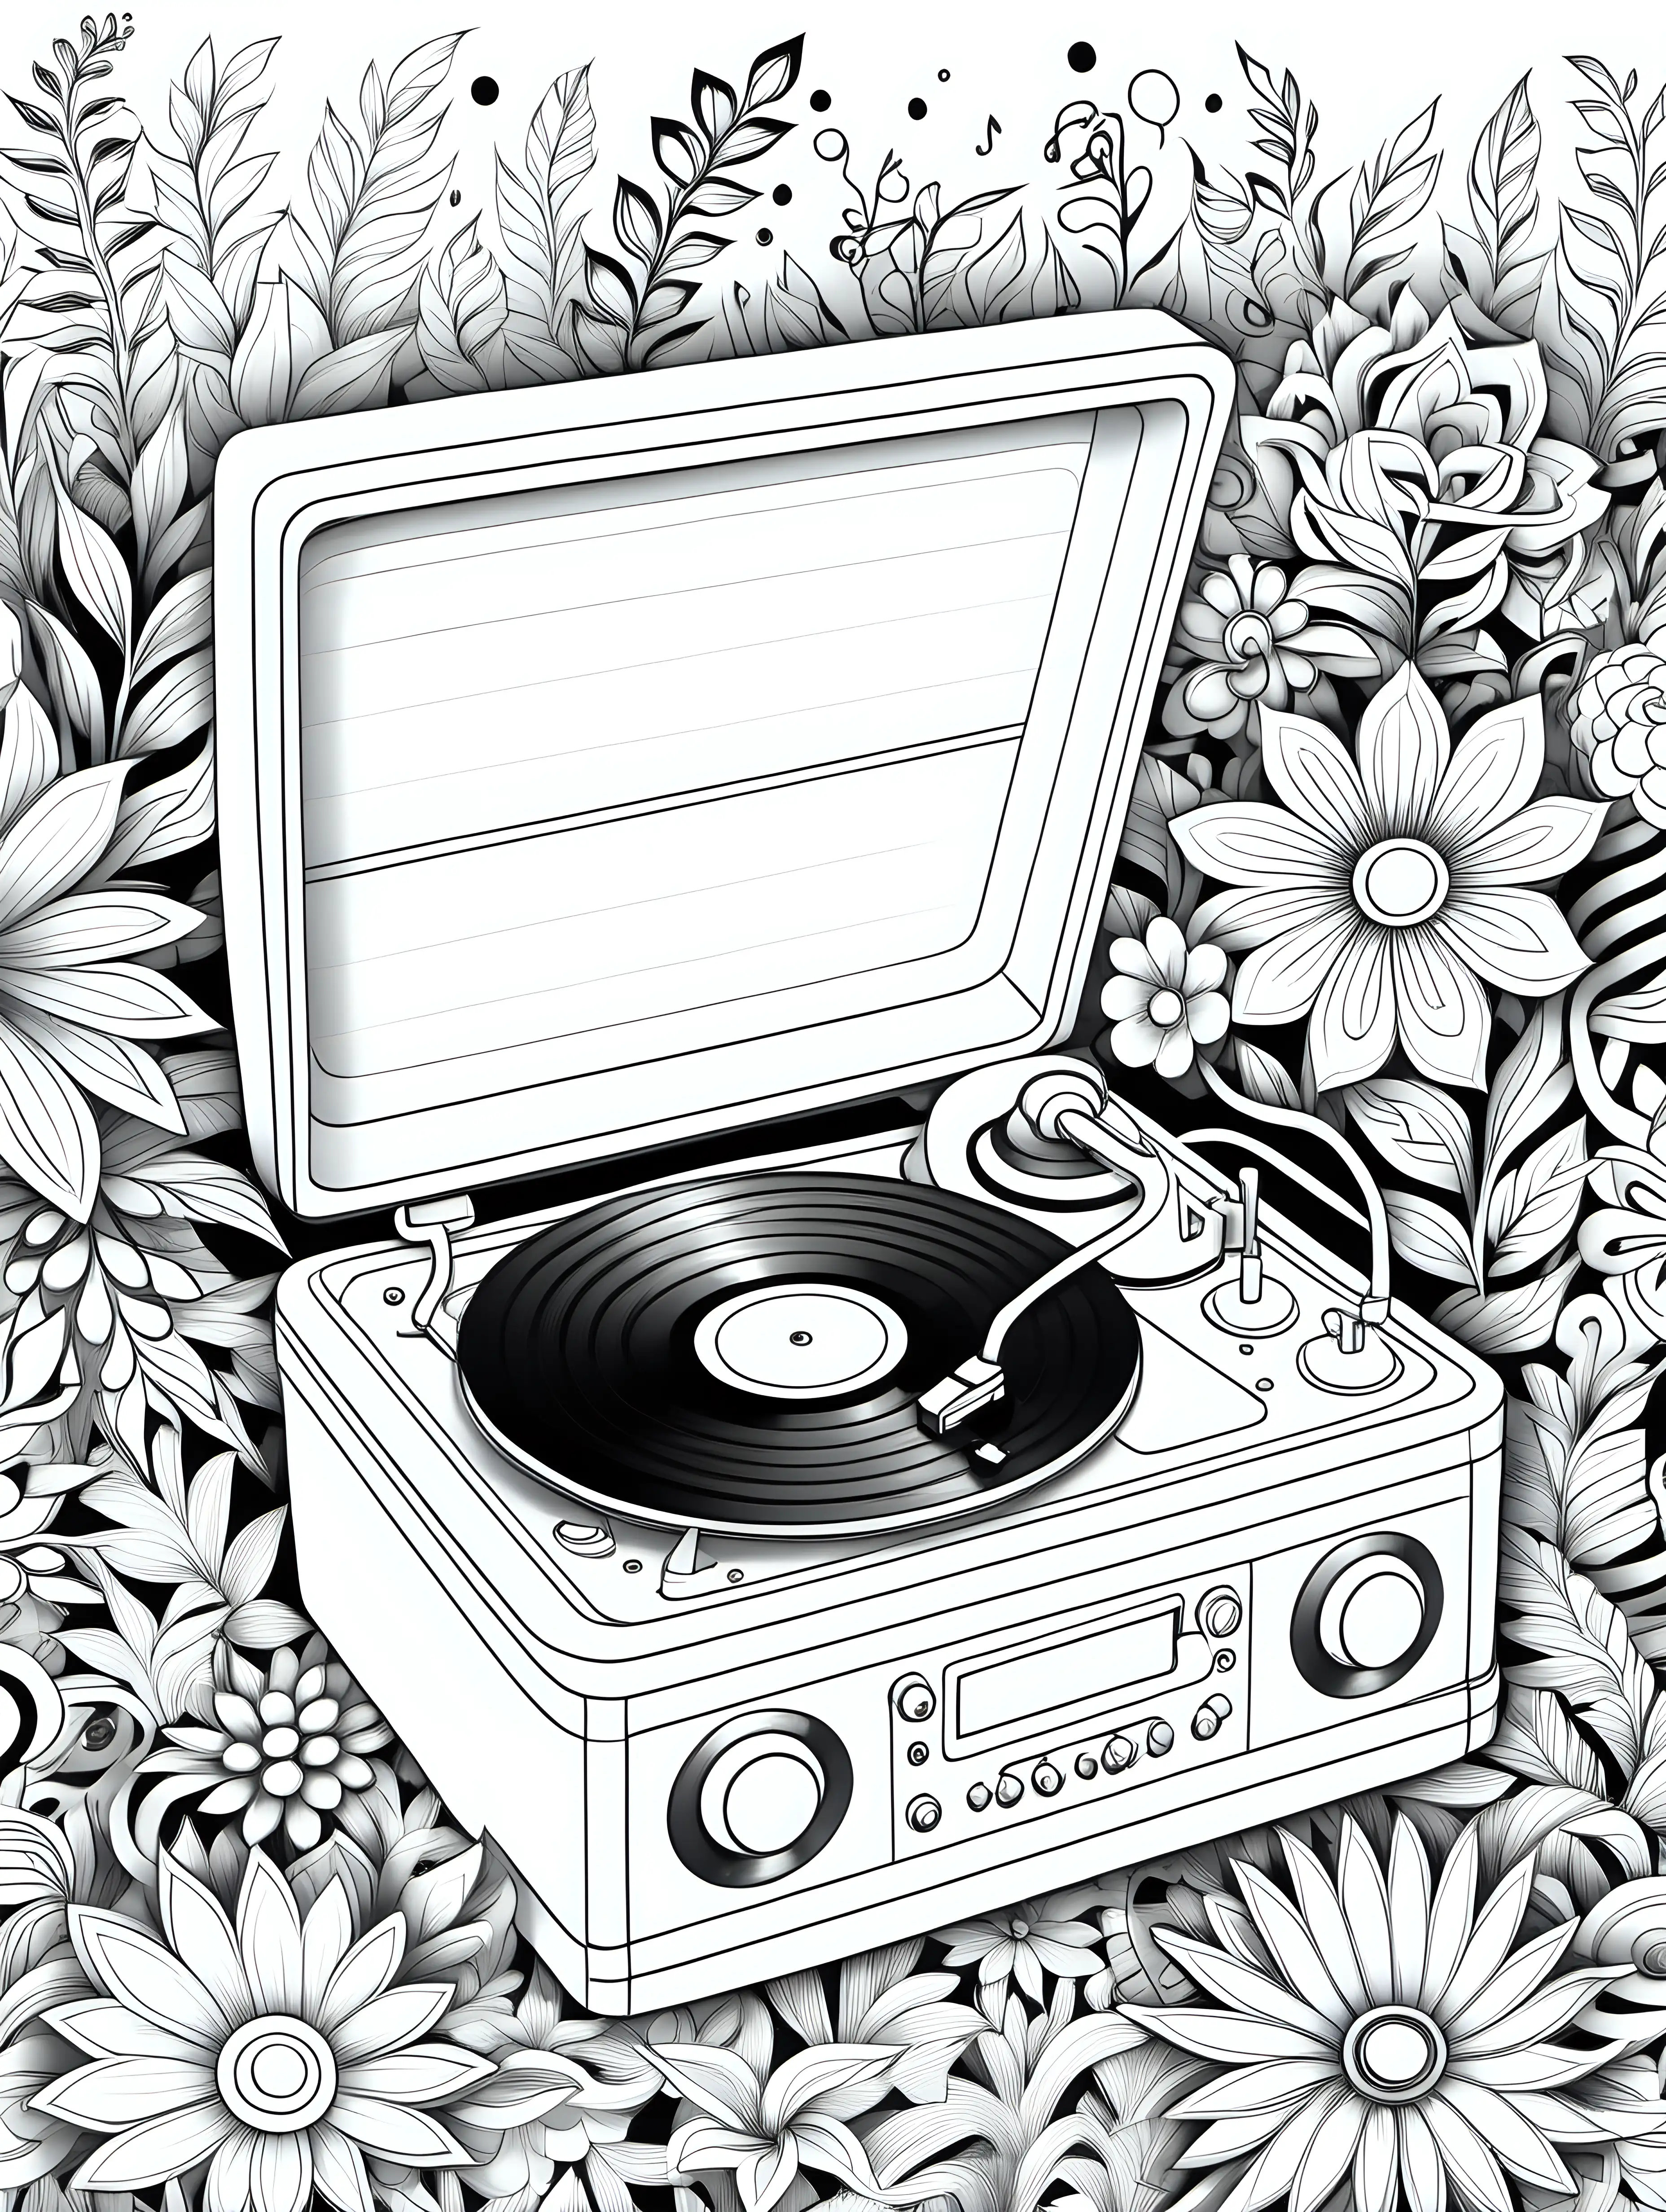 black and white, for a coloring book page, record player, black and white, coloring book page, children's coloring book, doodle floral art background, black and white, no shading, thick black lines, clean edges, full page, color by number